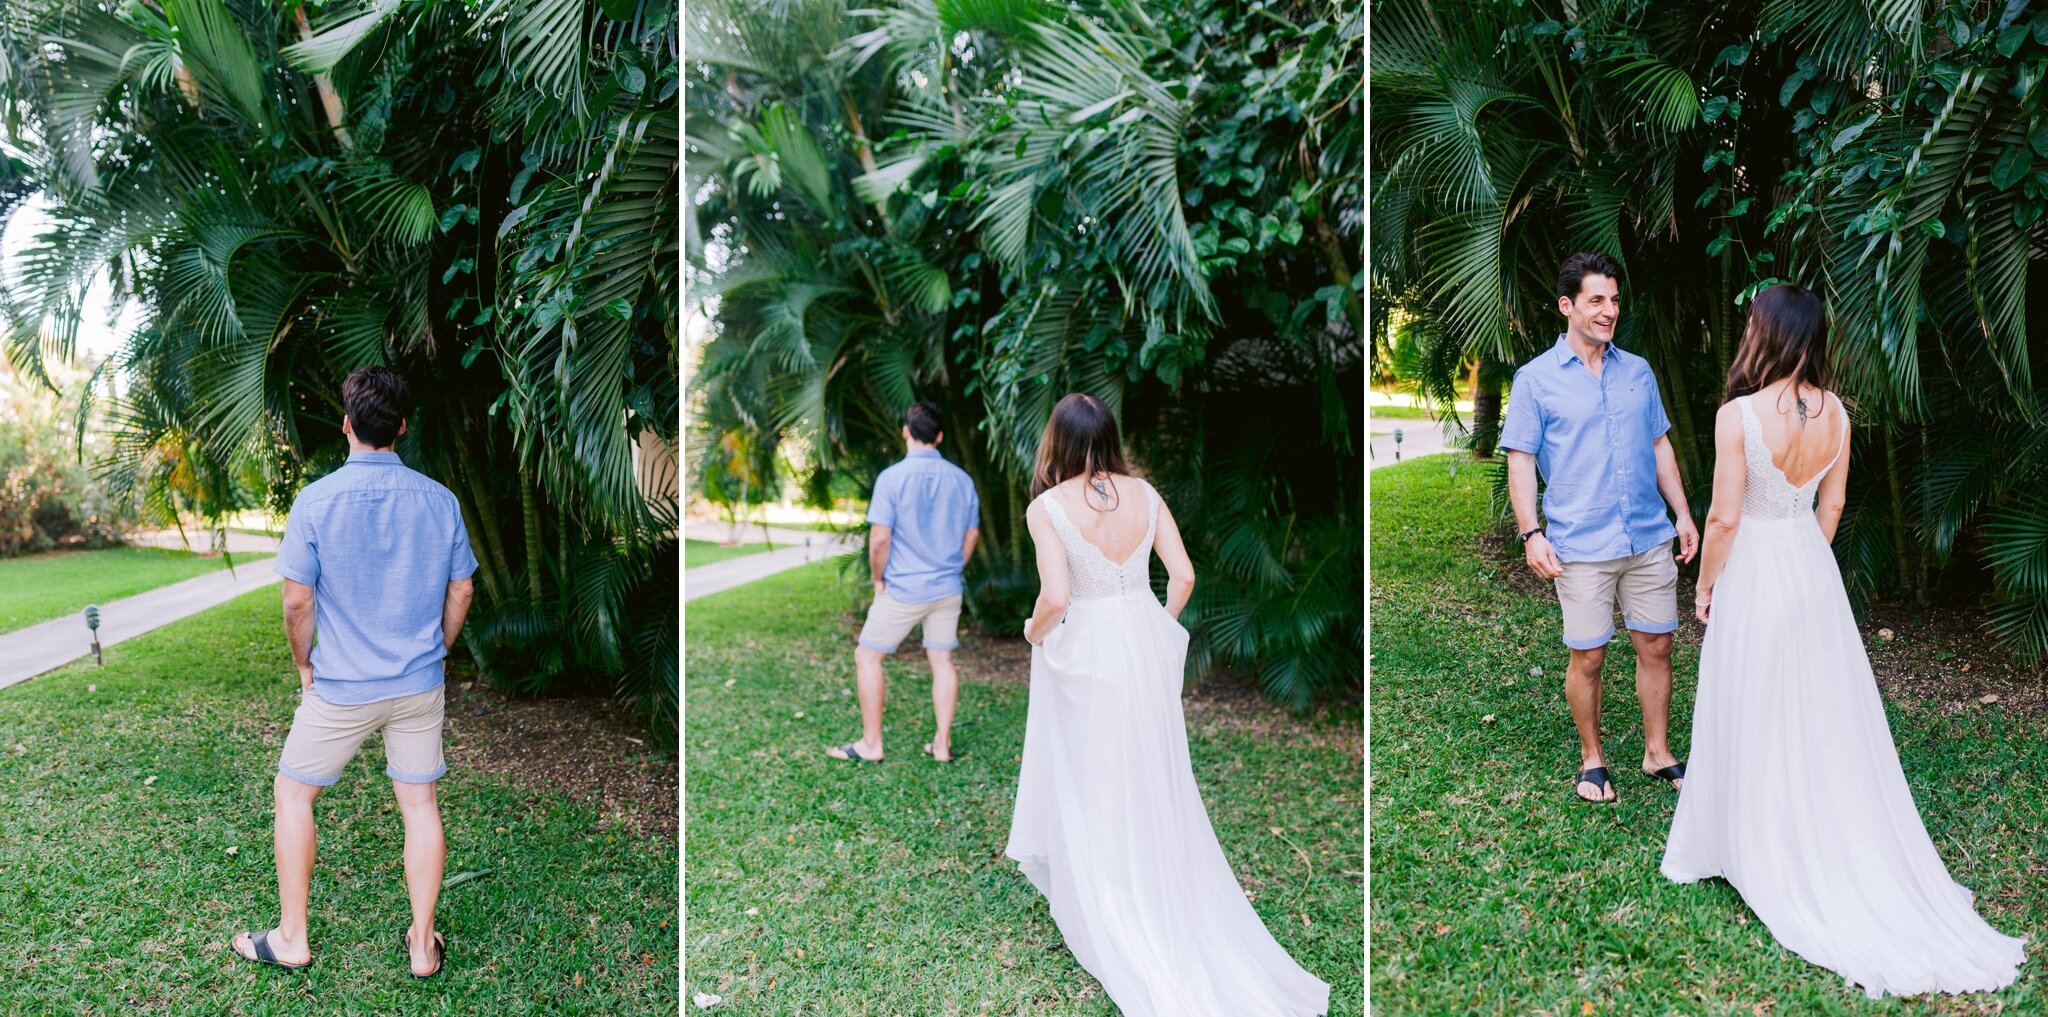 First look between bride and groom  at the Aston Maui Banyan for their Elopement at Secret Cove Beach - Maui Wedding Photographer